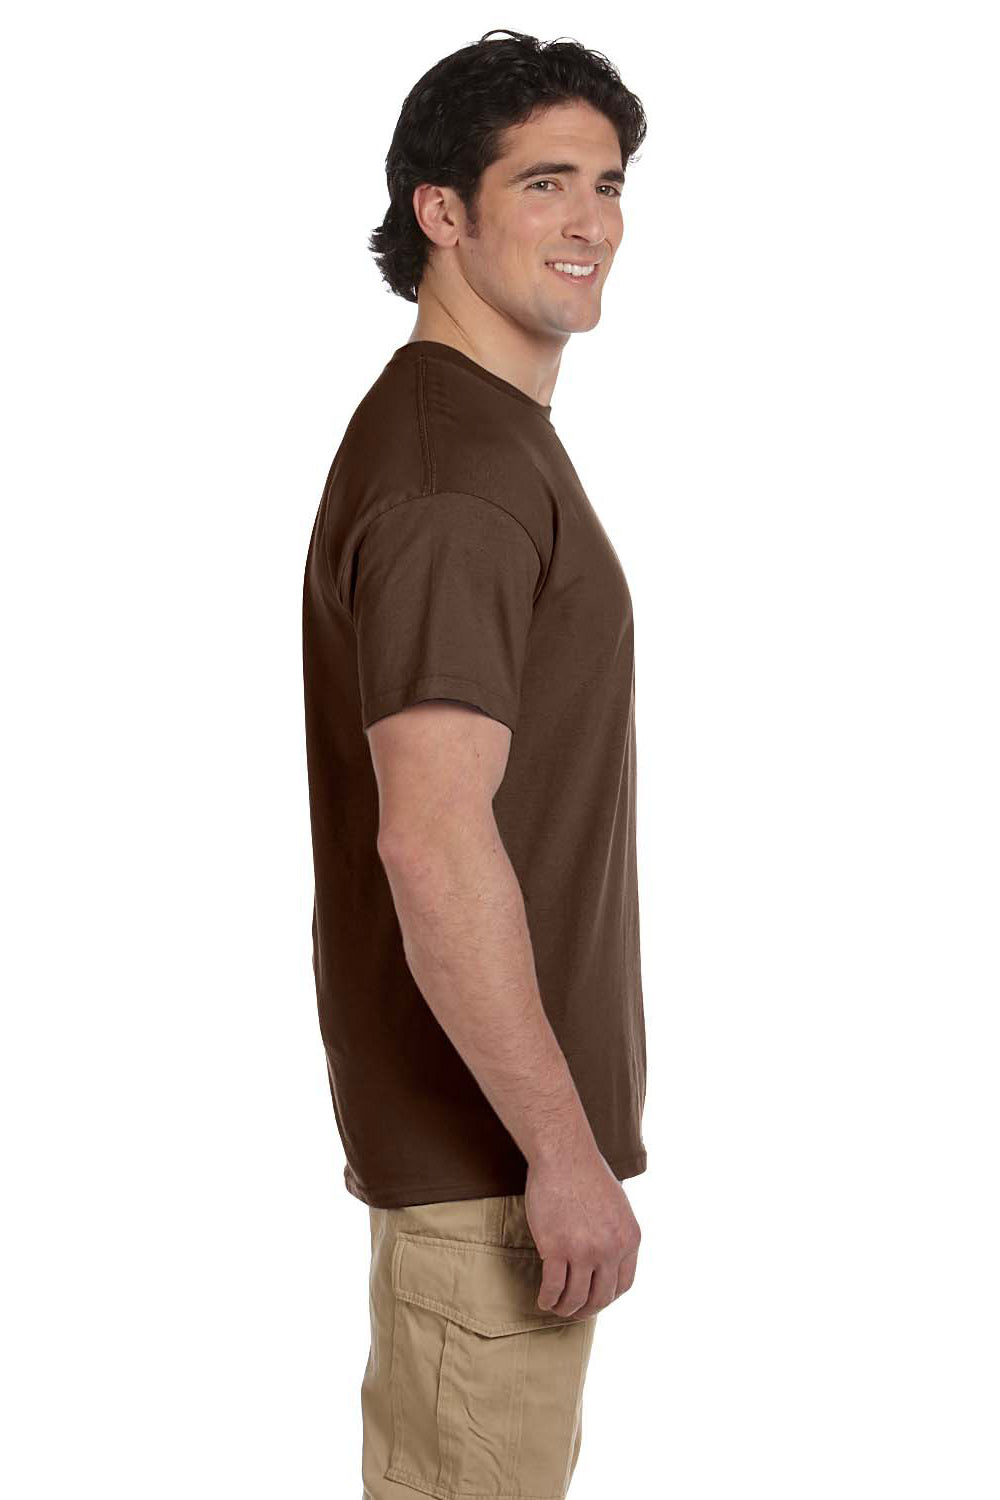 Fruit Of The Loom 3931 Mens HD Jersey Short Sleeve Crewneck T-Shirt Chocolate Brown Side